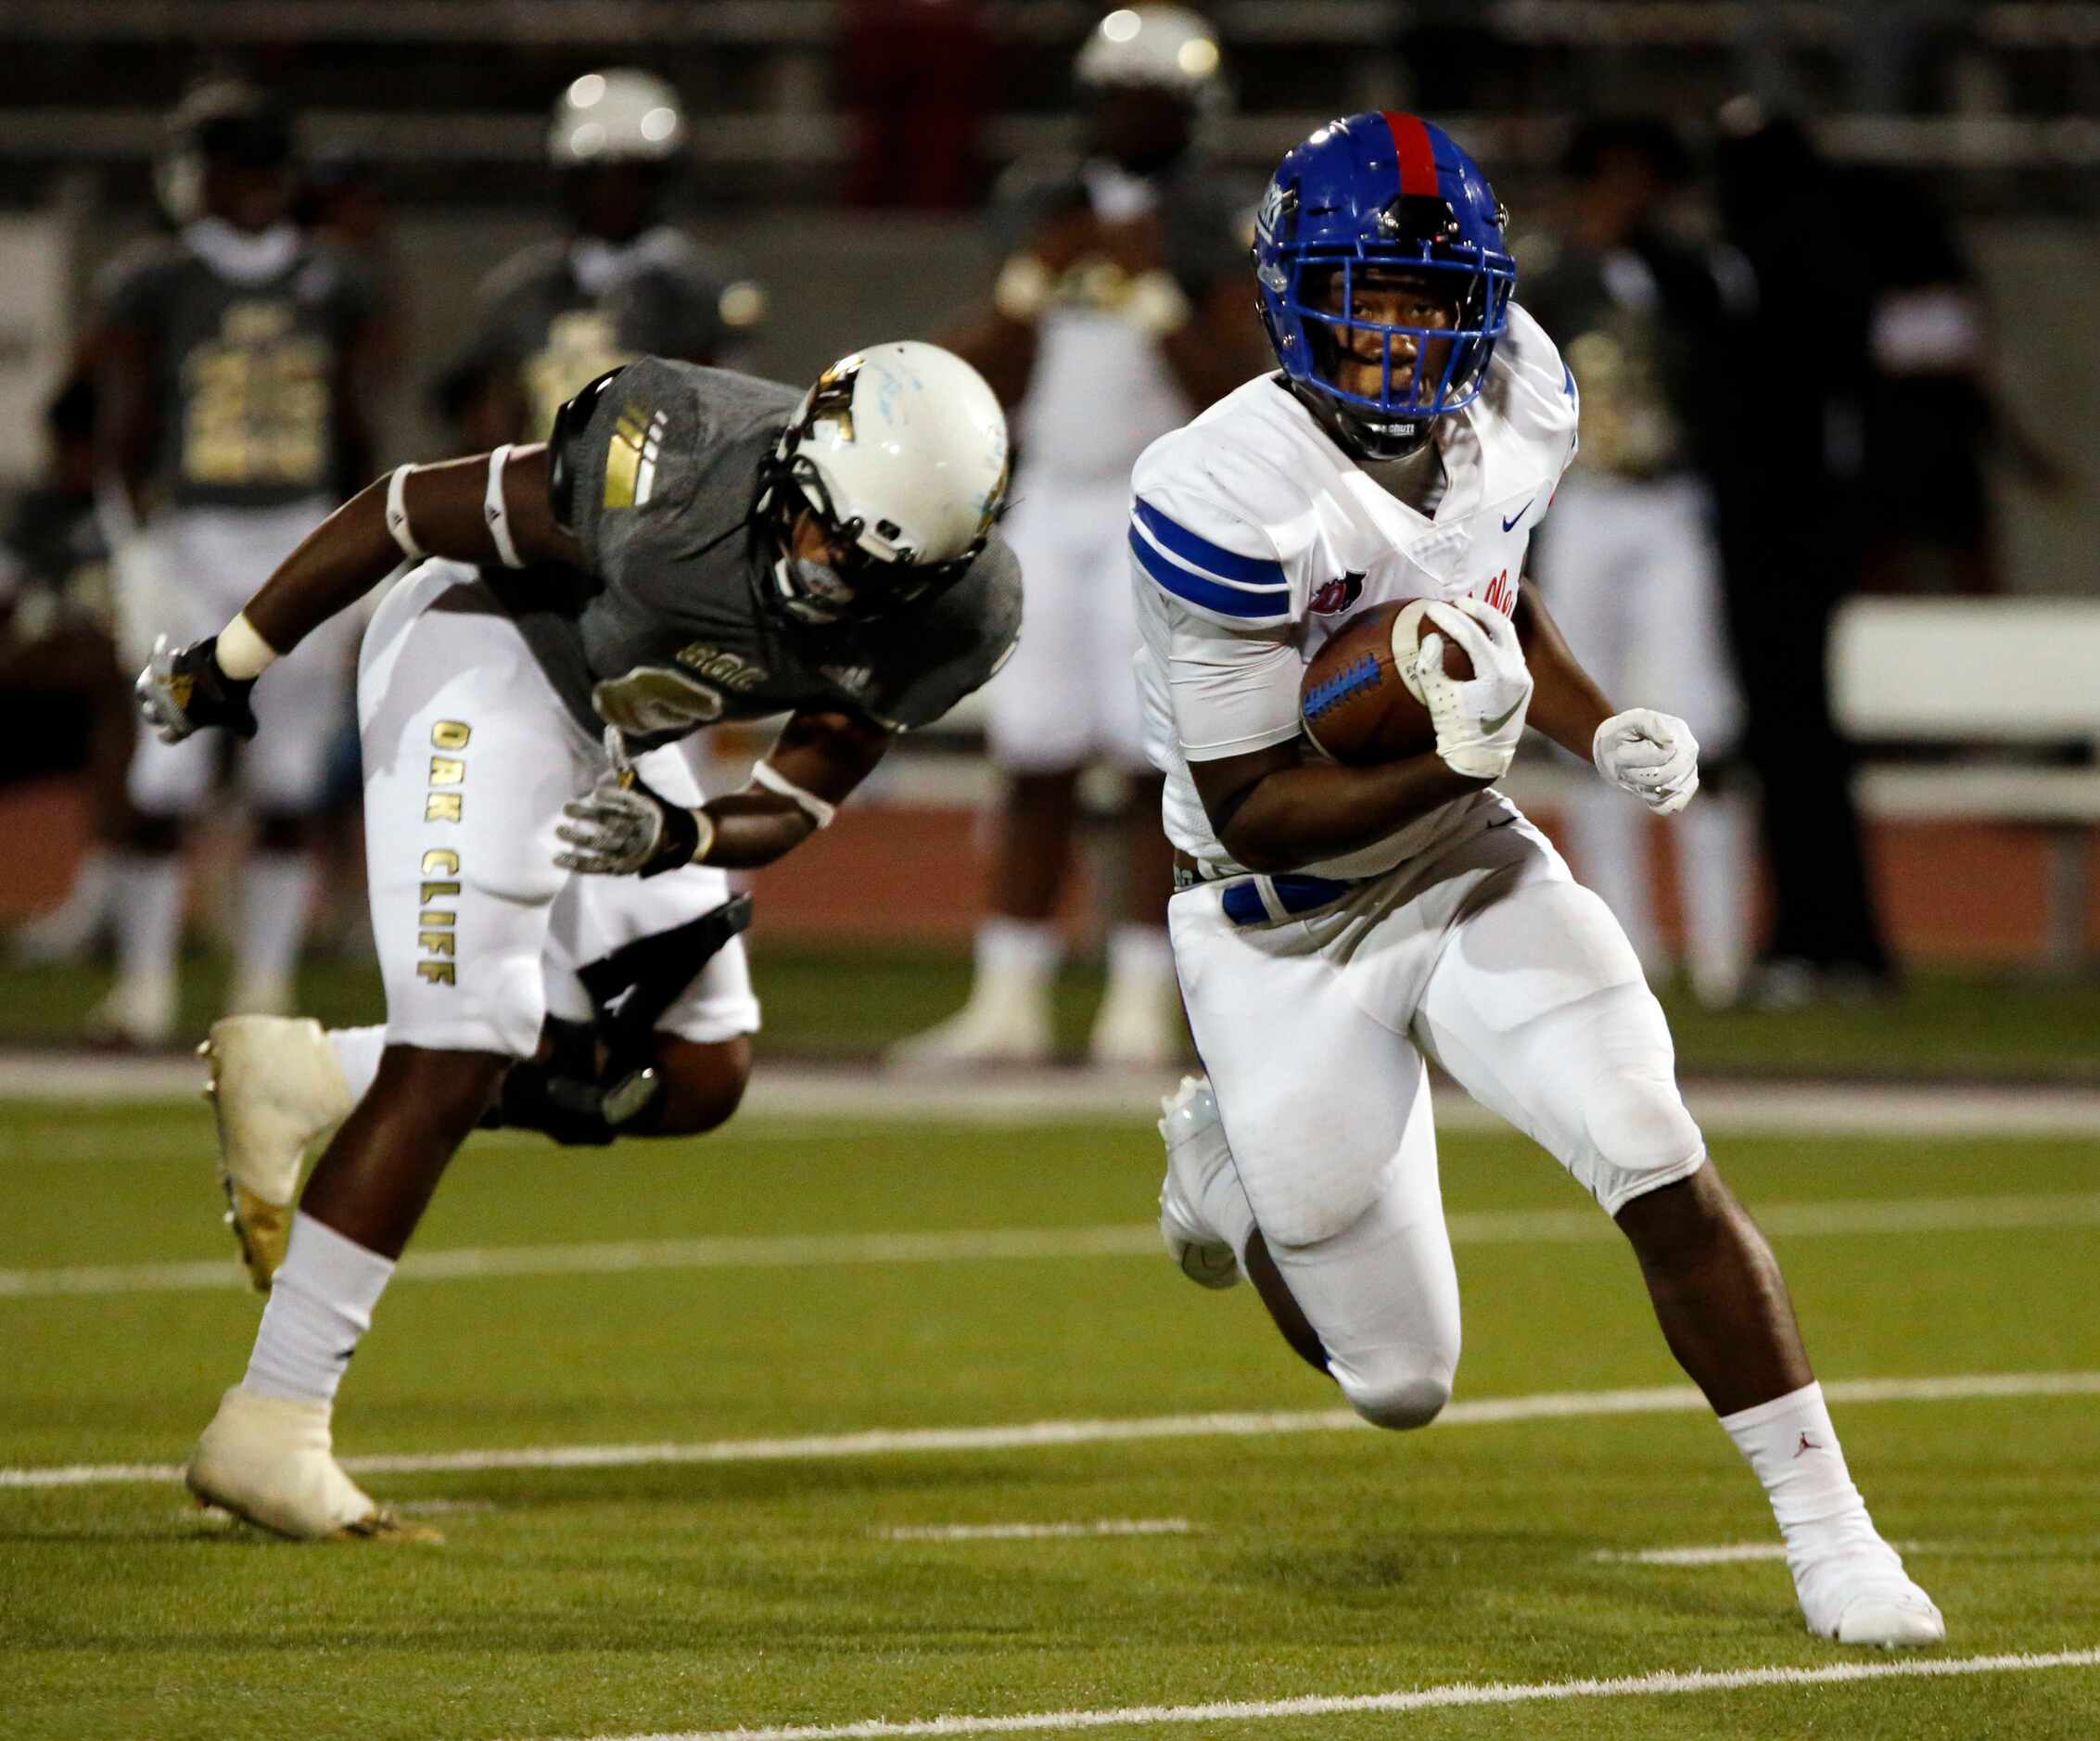 Duncanville’s Malachi Medlock (5) eludes South Oak Cliff’s Adul Muhammad (6) and gains a...